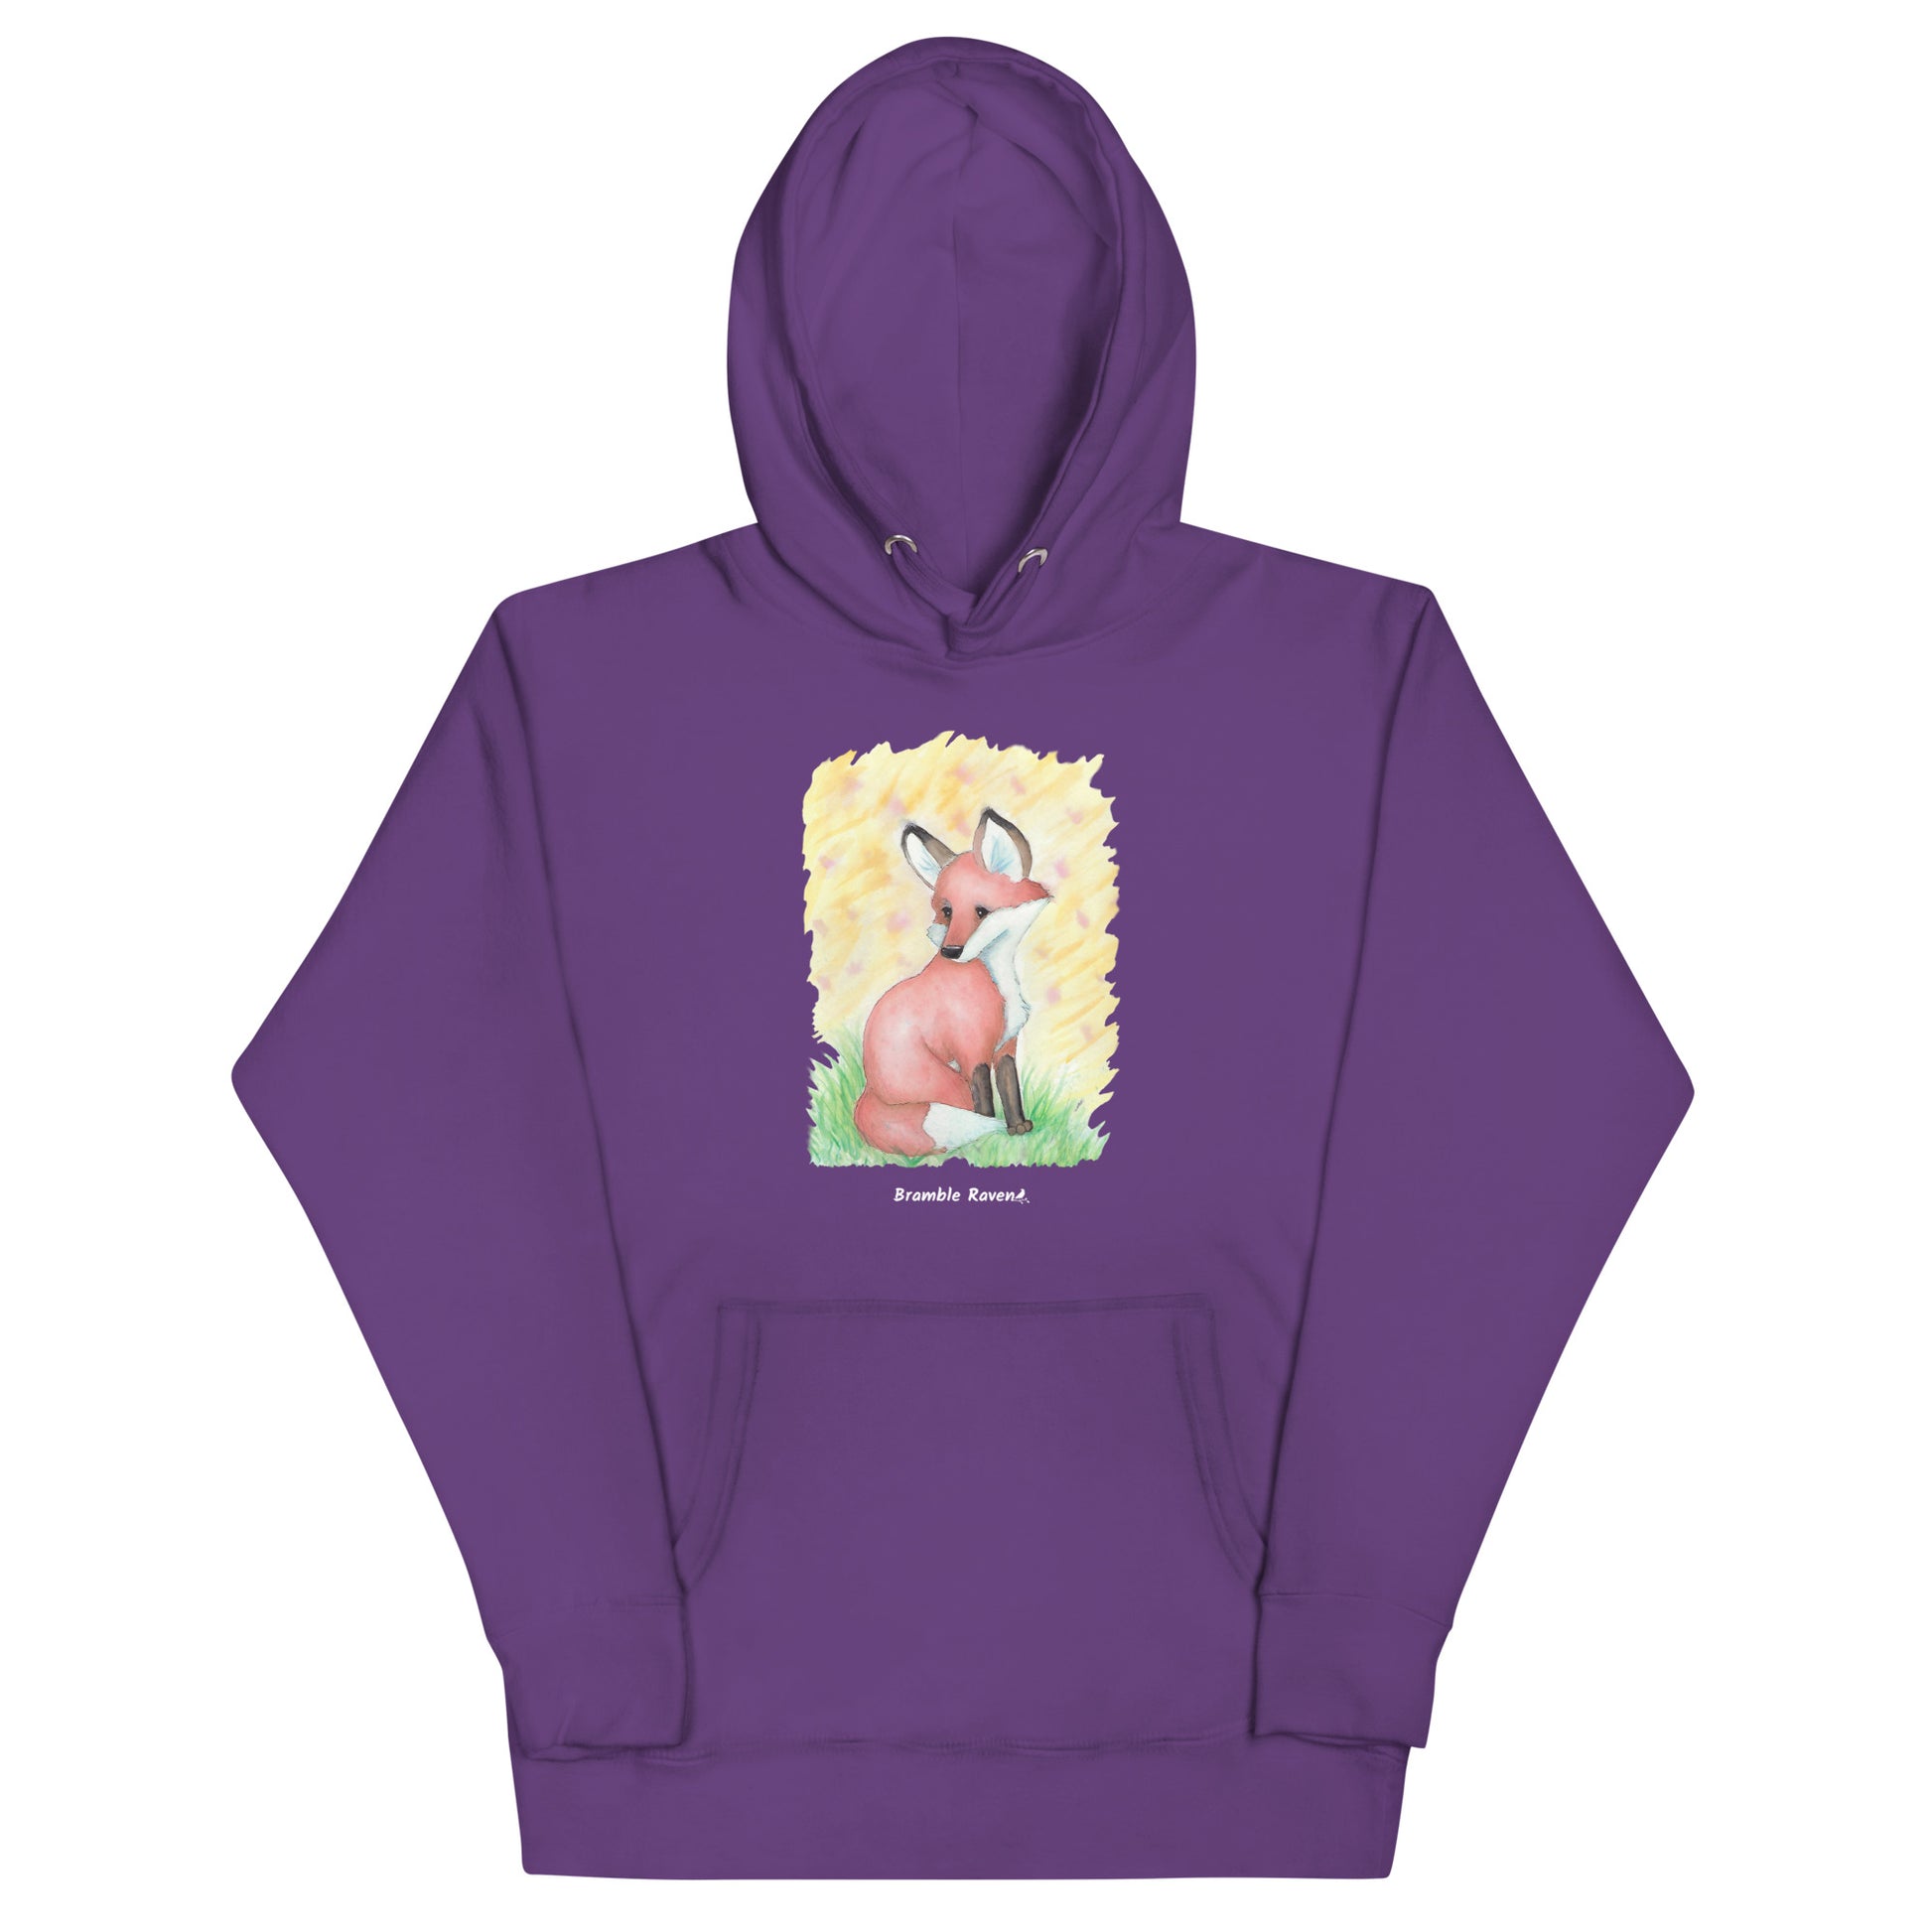 Unisex purple colored hoodie. Features original watercolor painting of a fox in the grass against a yellow backdrop.